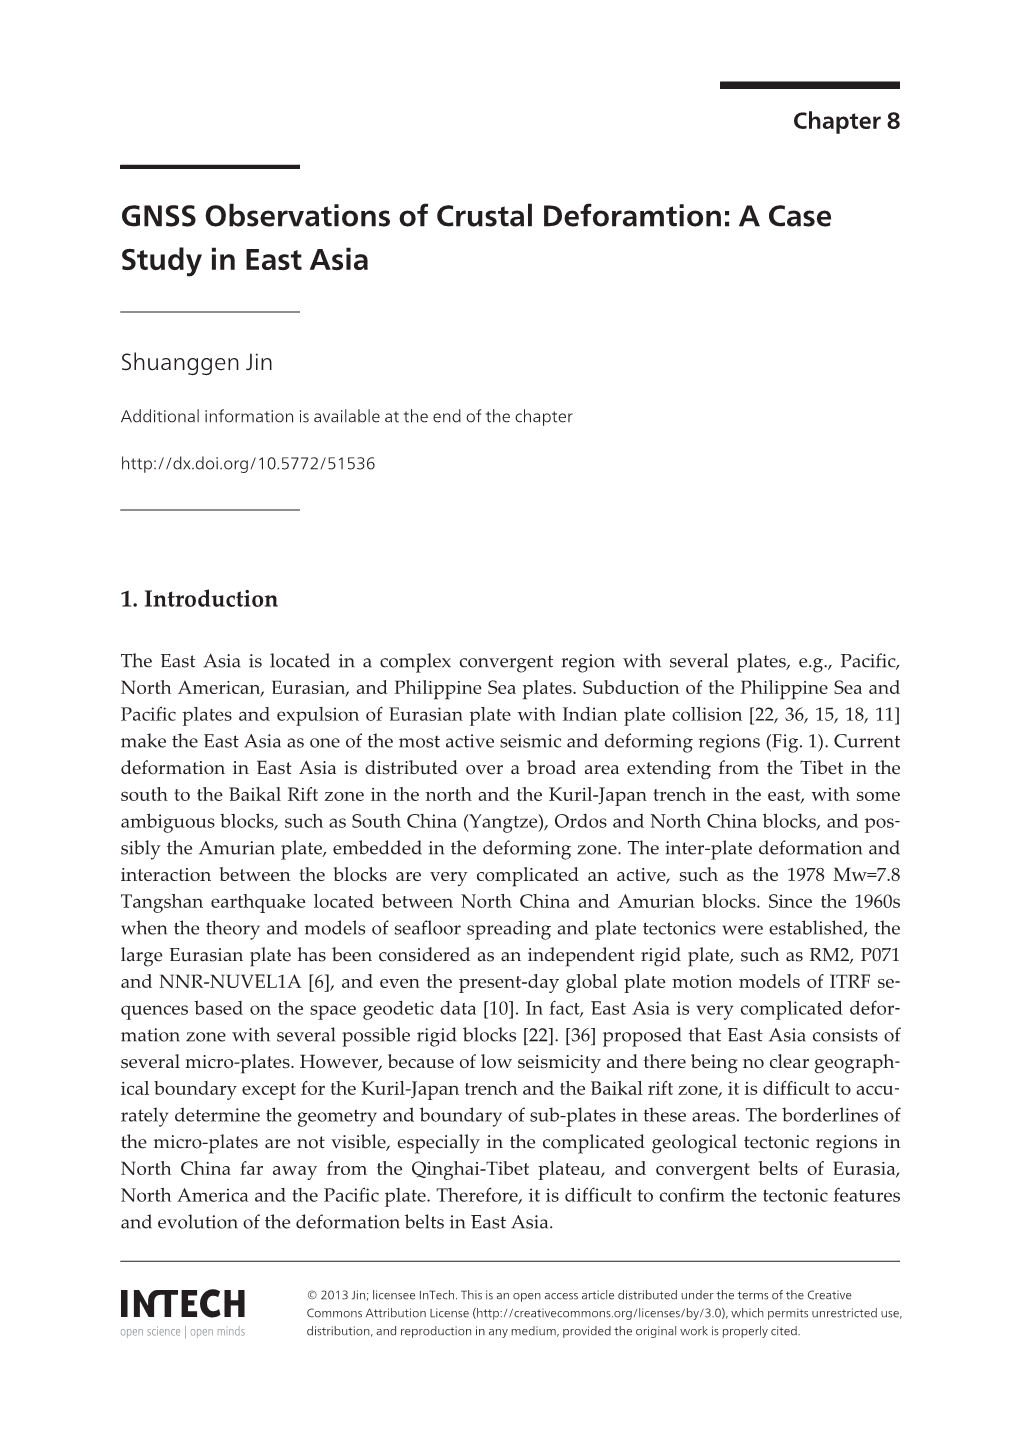 GNSS Observations of Crustal Deforamtion: a Case Study in East Asia